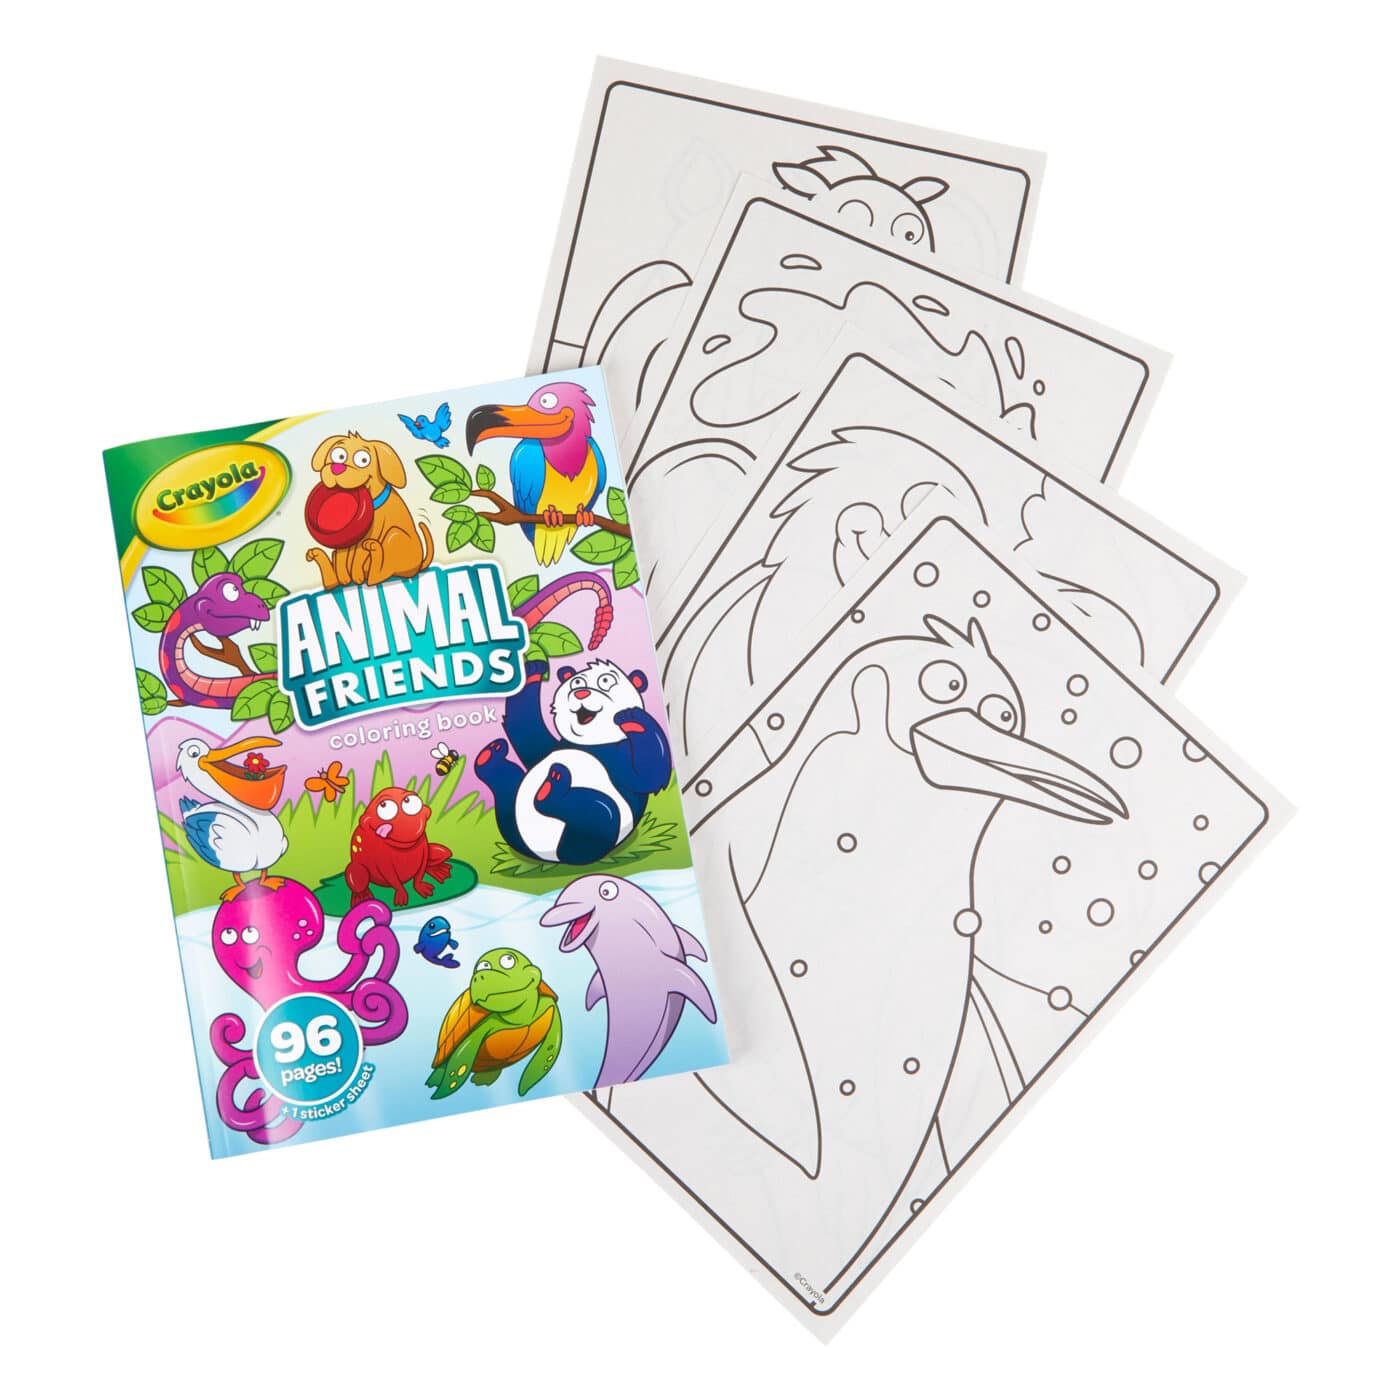 Crayola - Animal Friends Colouring Book with Stickers2